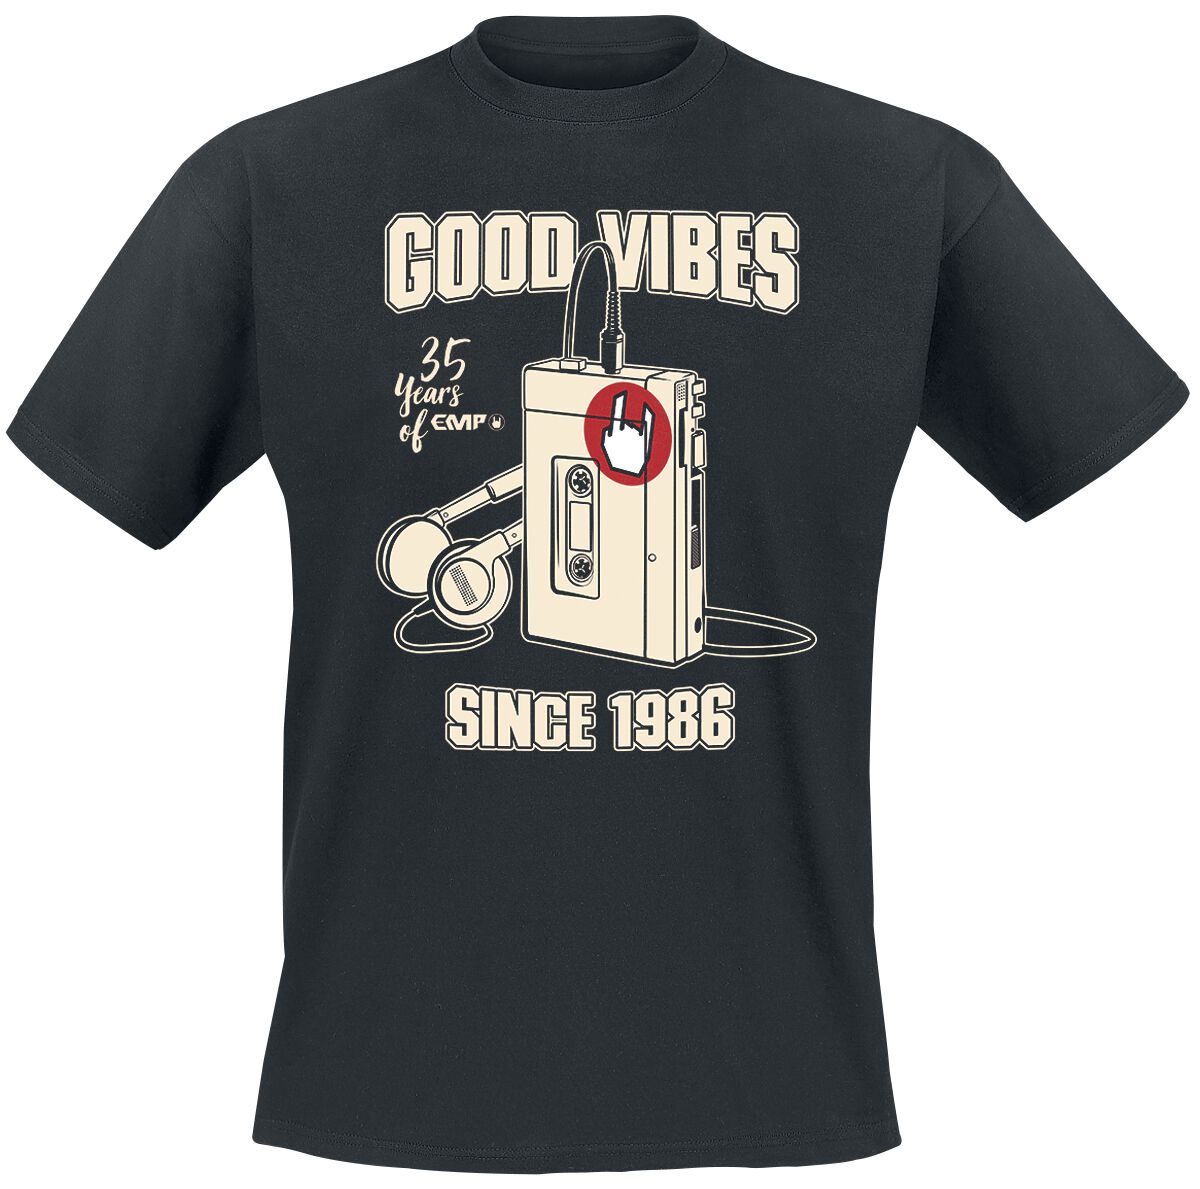 35 Years of EMP Good Vibes Since 1986 T-Shirt black